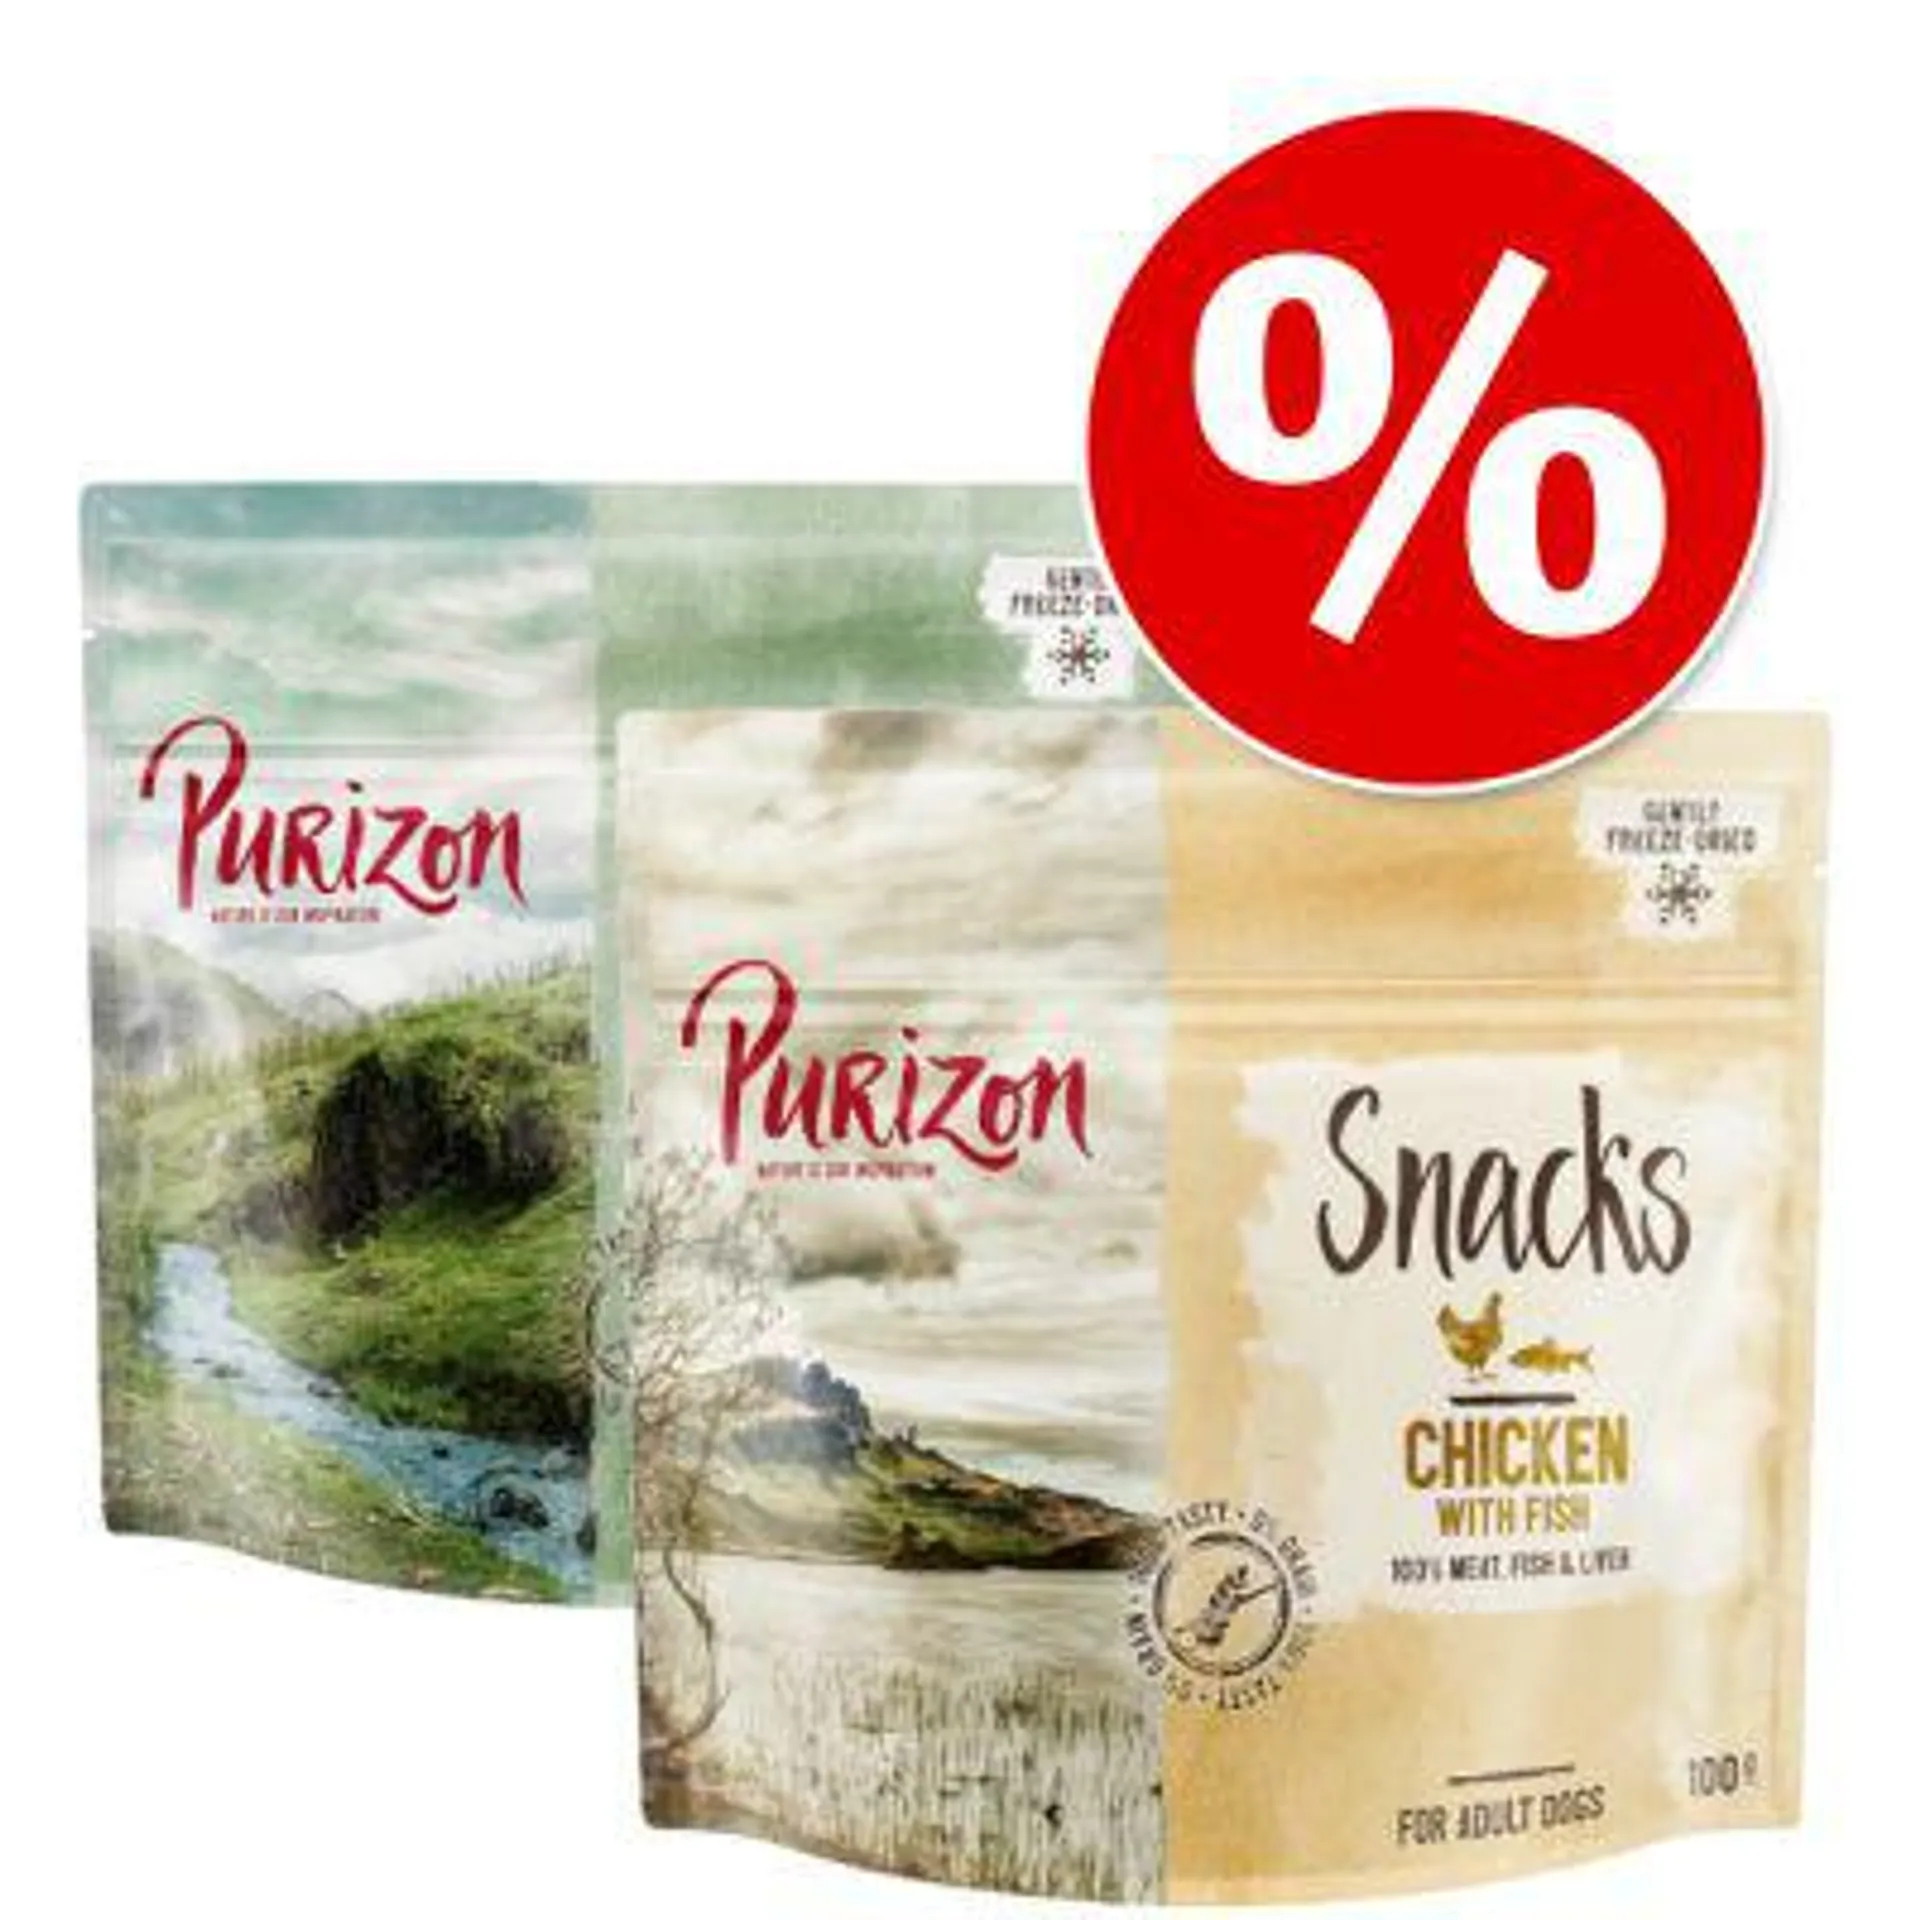 2 x 100g Purizon Grain-Free Mixed Pack Dog Snacks - Special Price!*